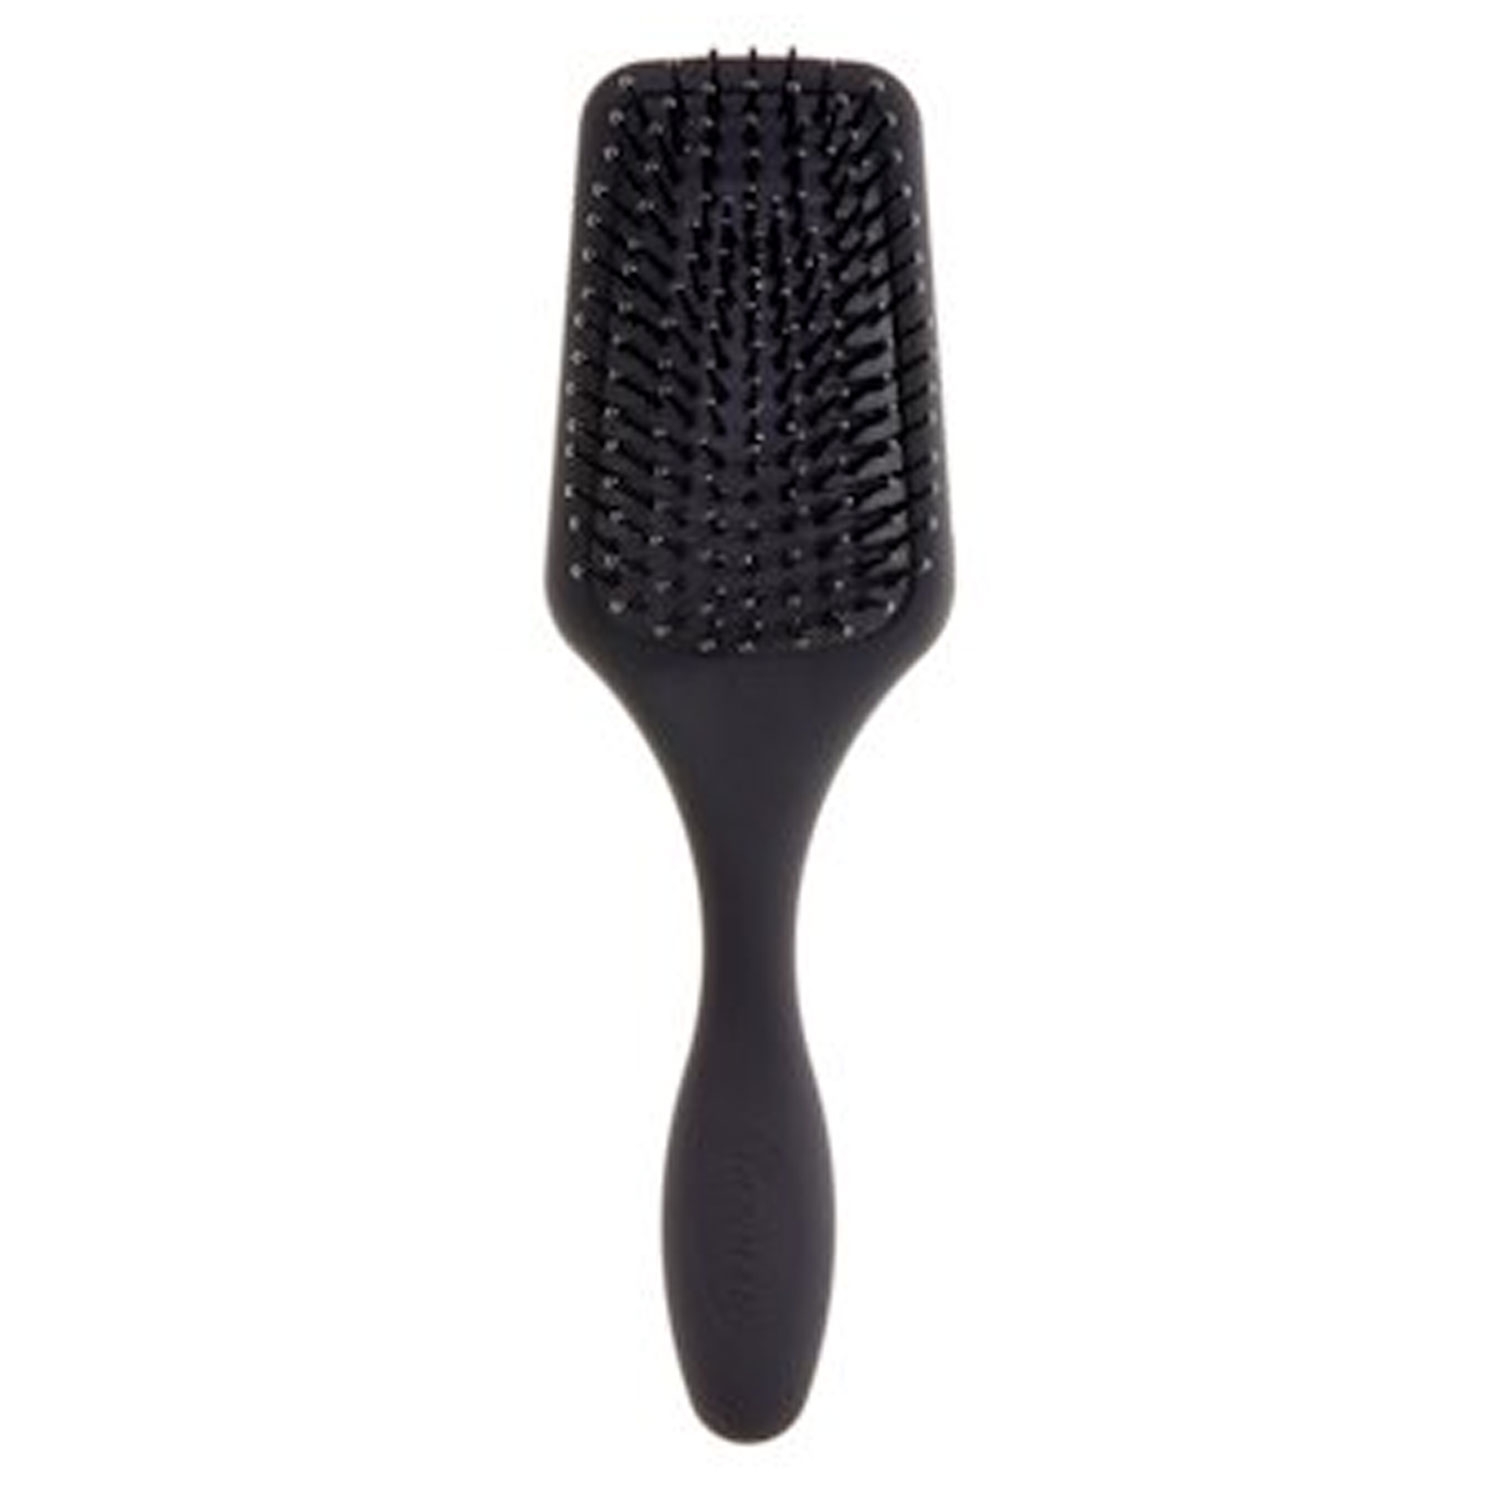 Product image from Denman - Paddle Brush D84